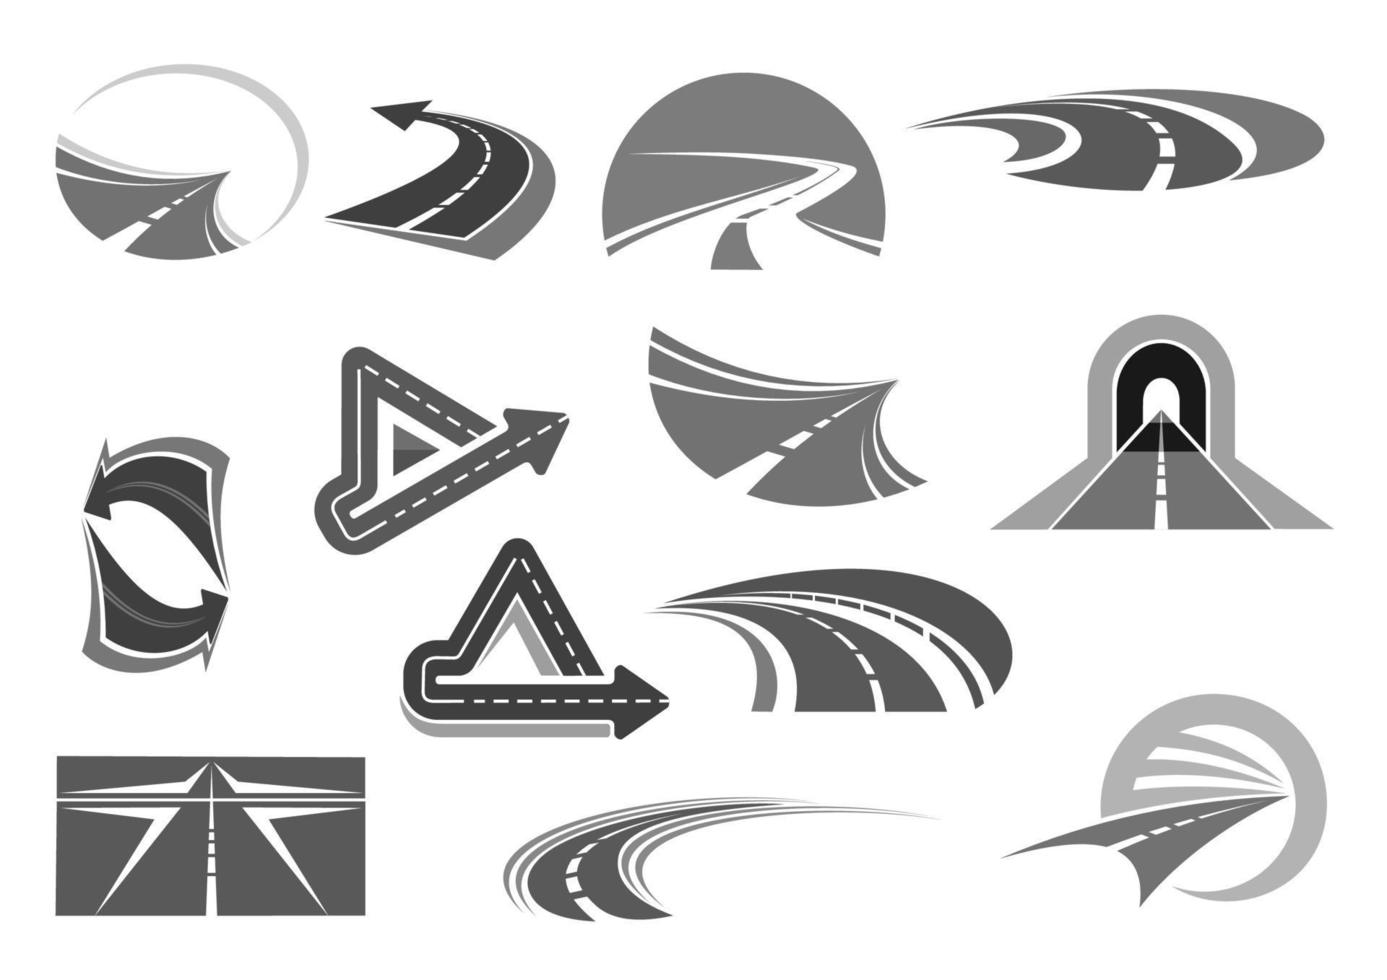 Vector icons of roads tunnels and highway signs